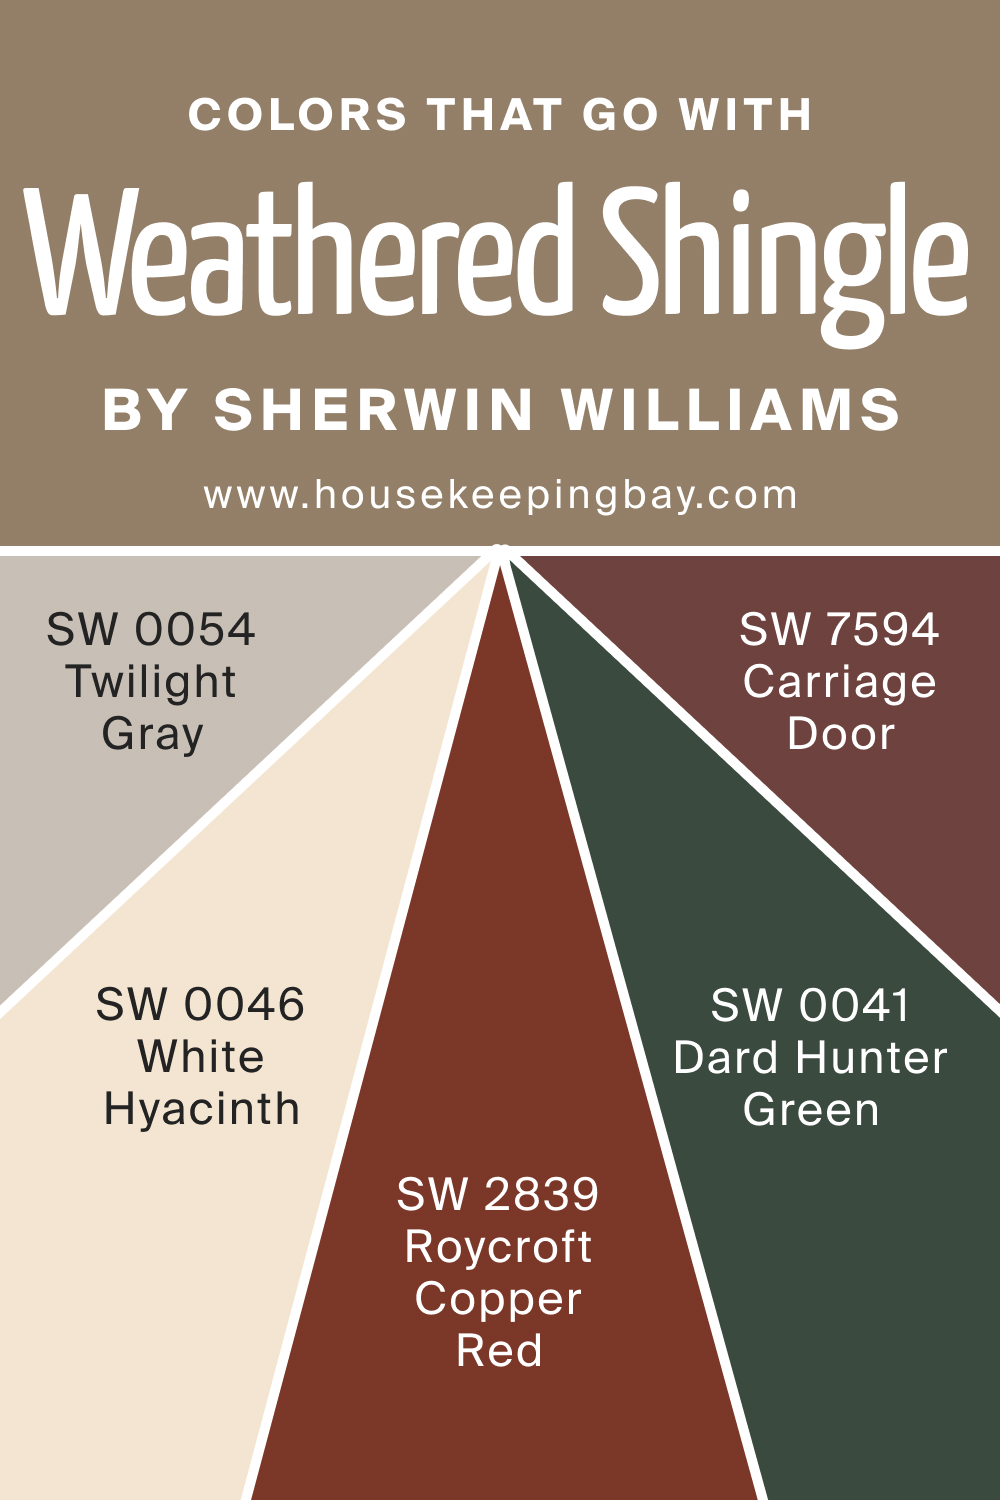 Colors that goes with SW 2841 Weathered Shingle by Sherwin Williams